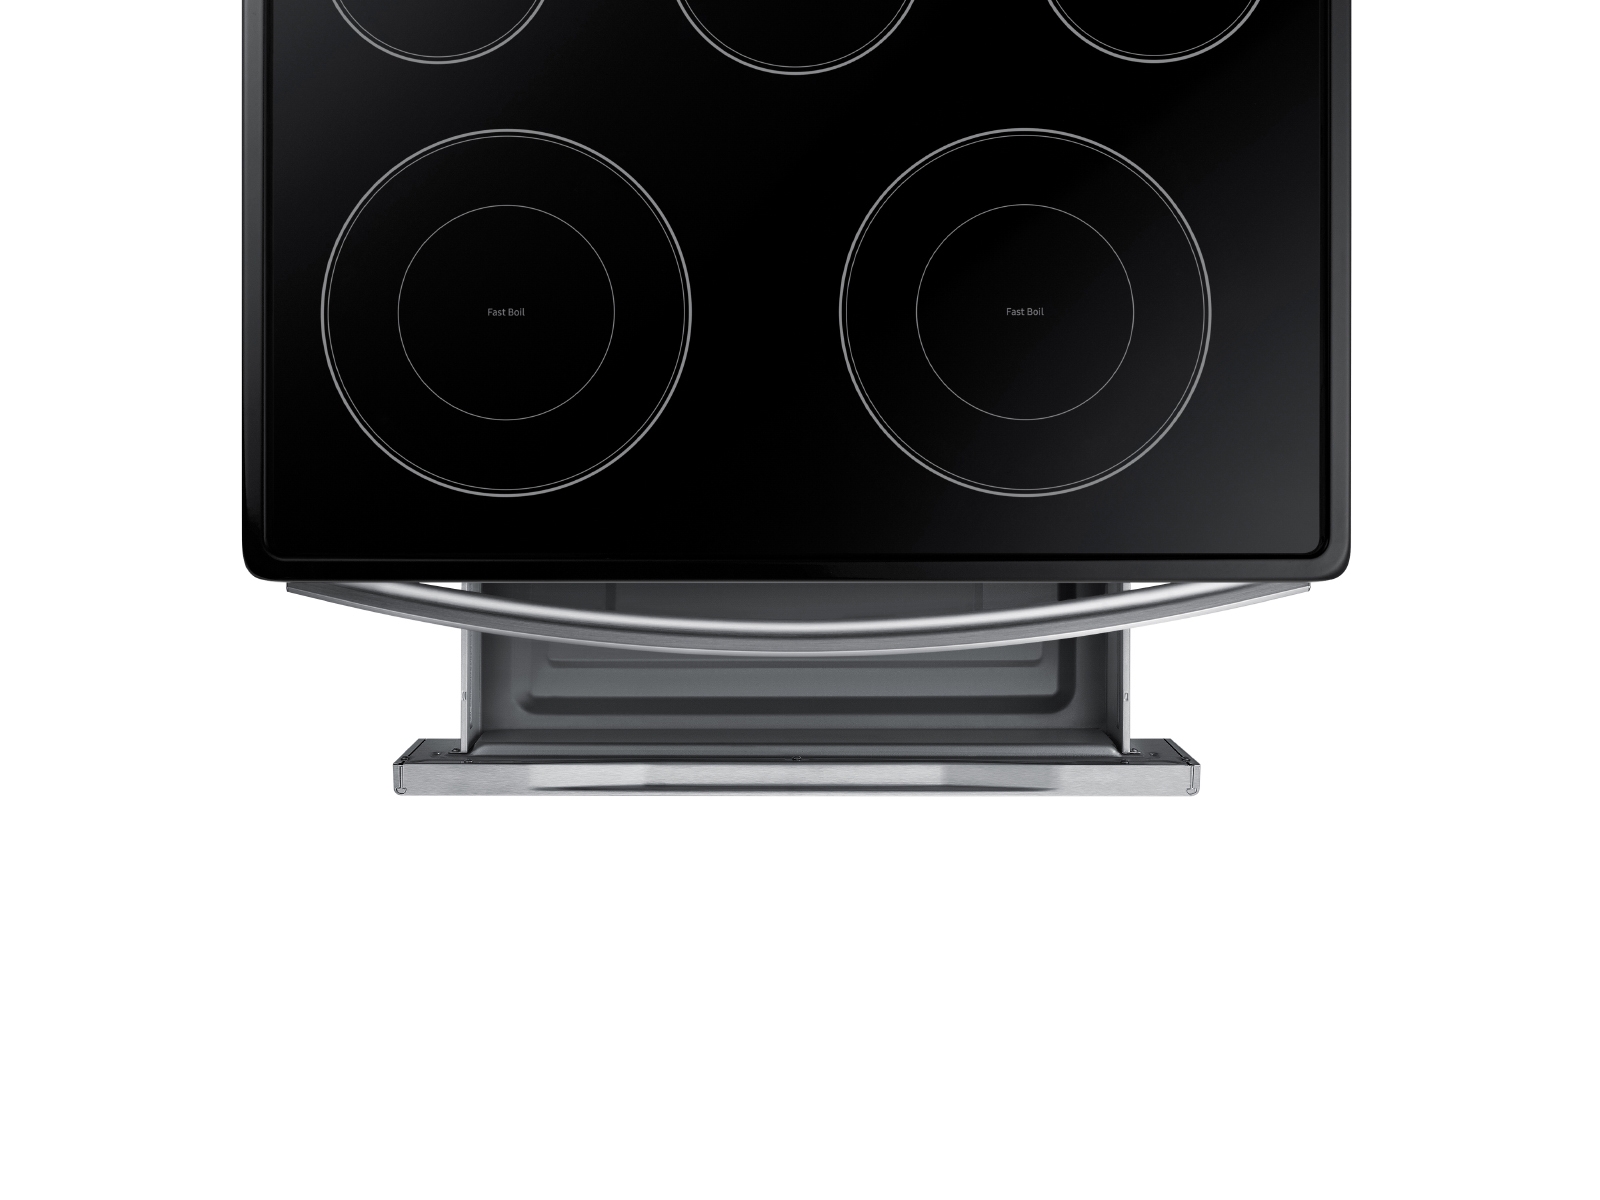 Thumbnail image of 5.9 cu.ft. Freestanding Electric Range in Stainless Steel